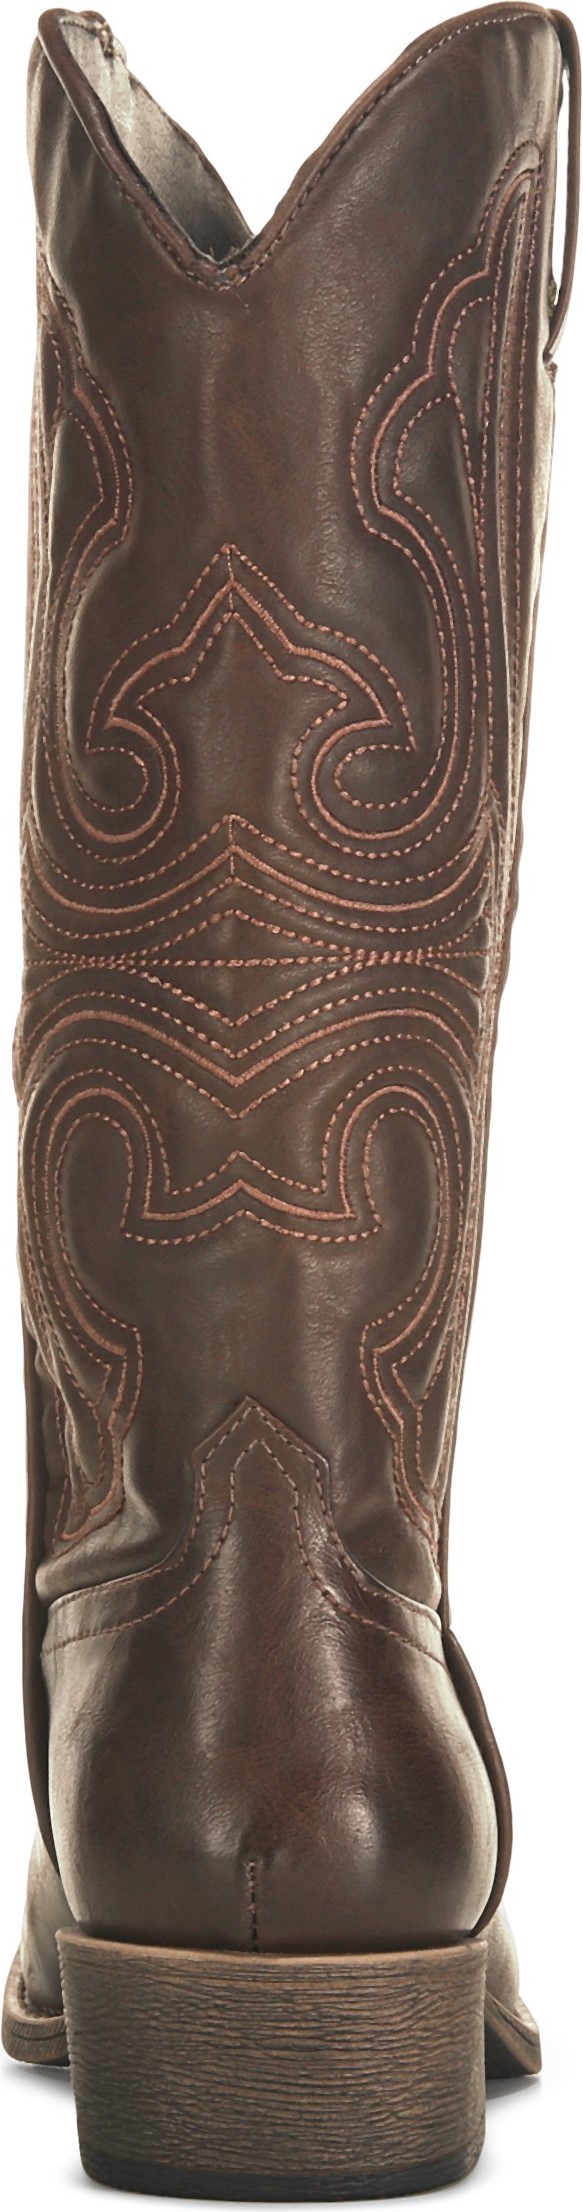 Coconuts Legend Cowboy Boot - Free Shipping